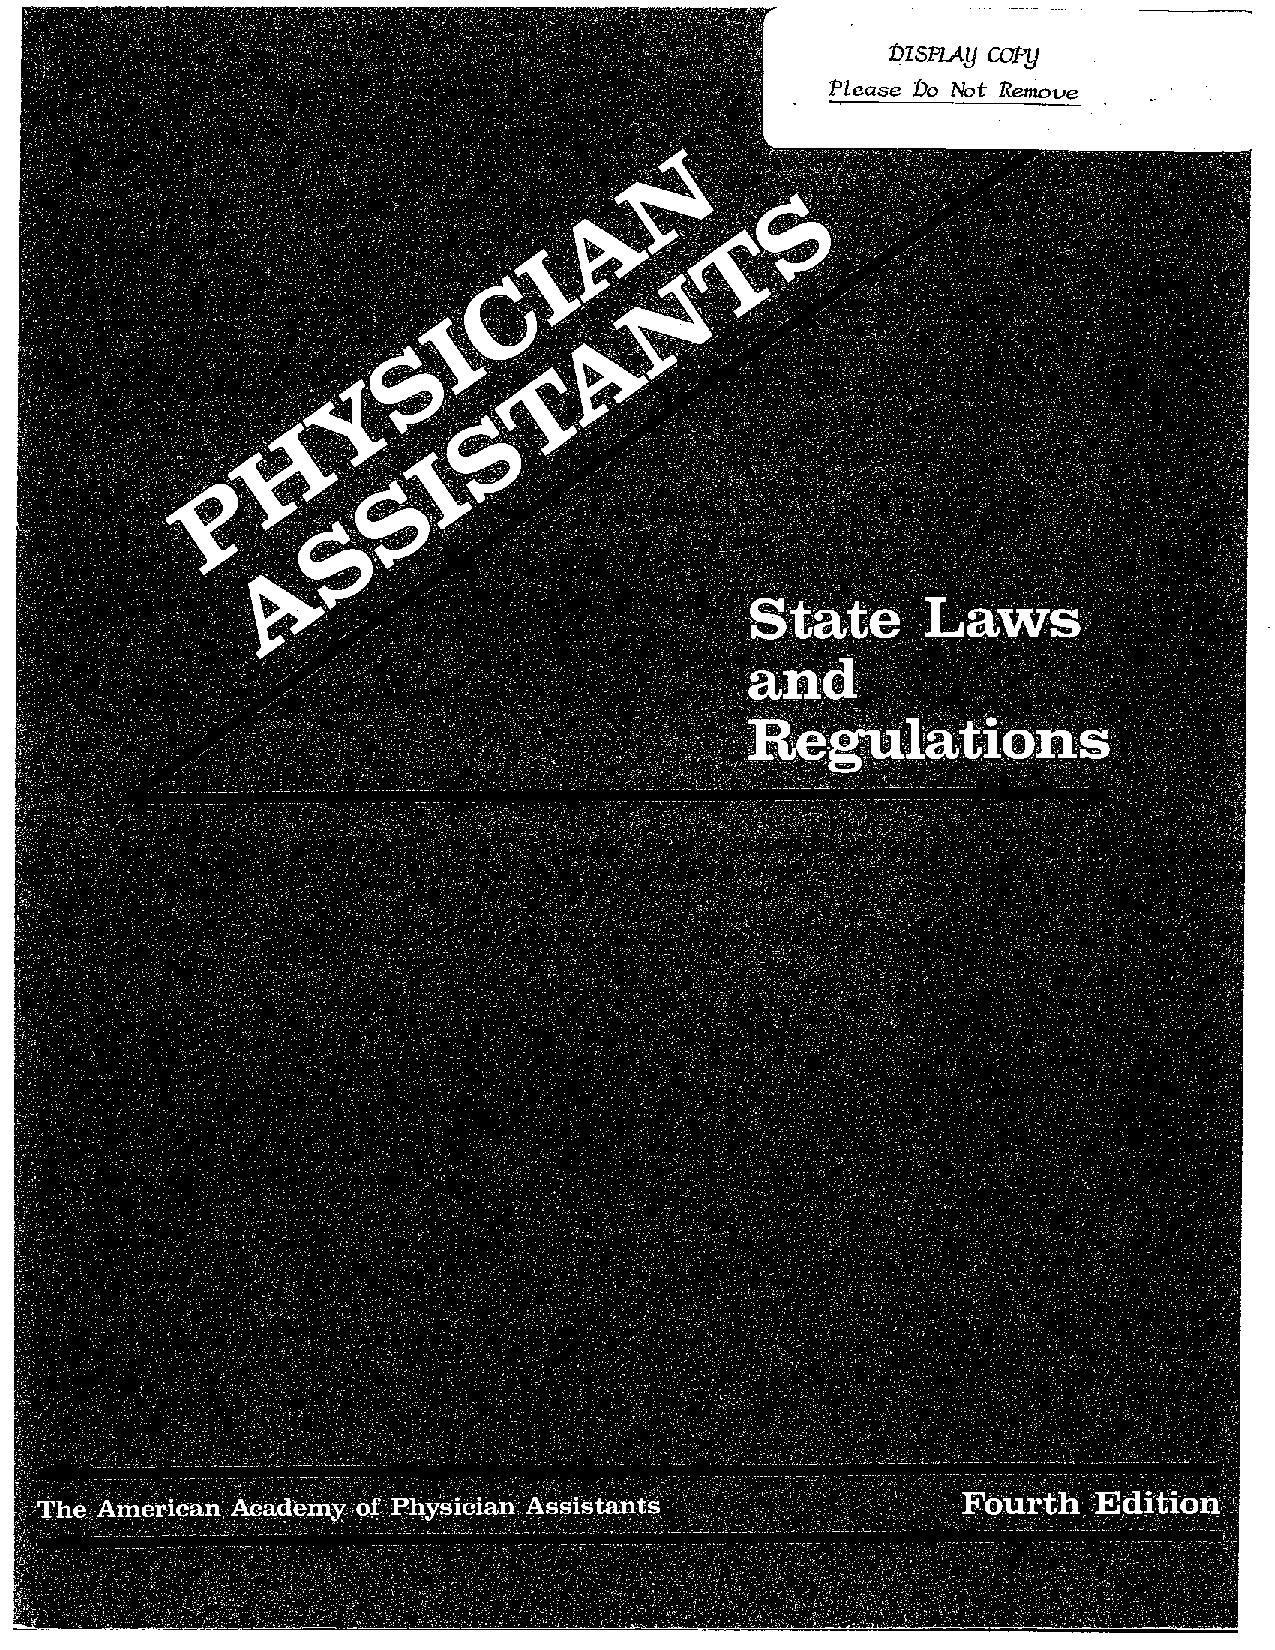 PA State Laws and Regulations 4th Edition